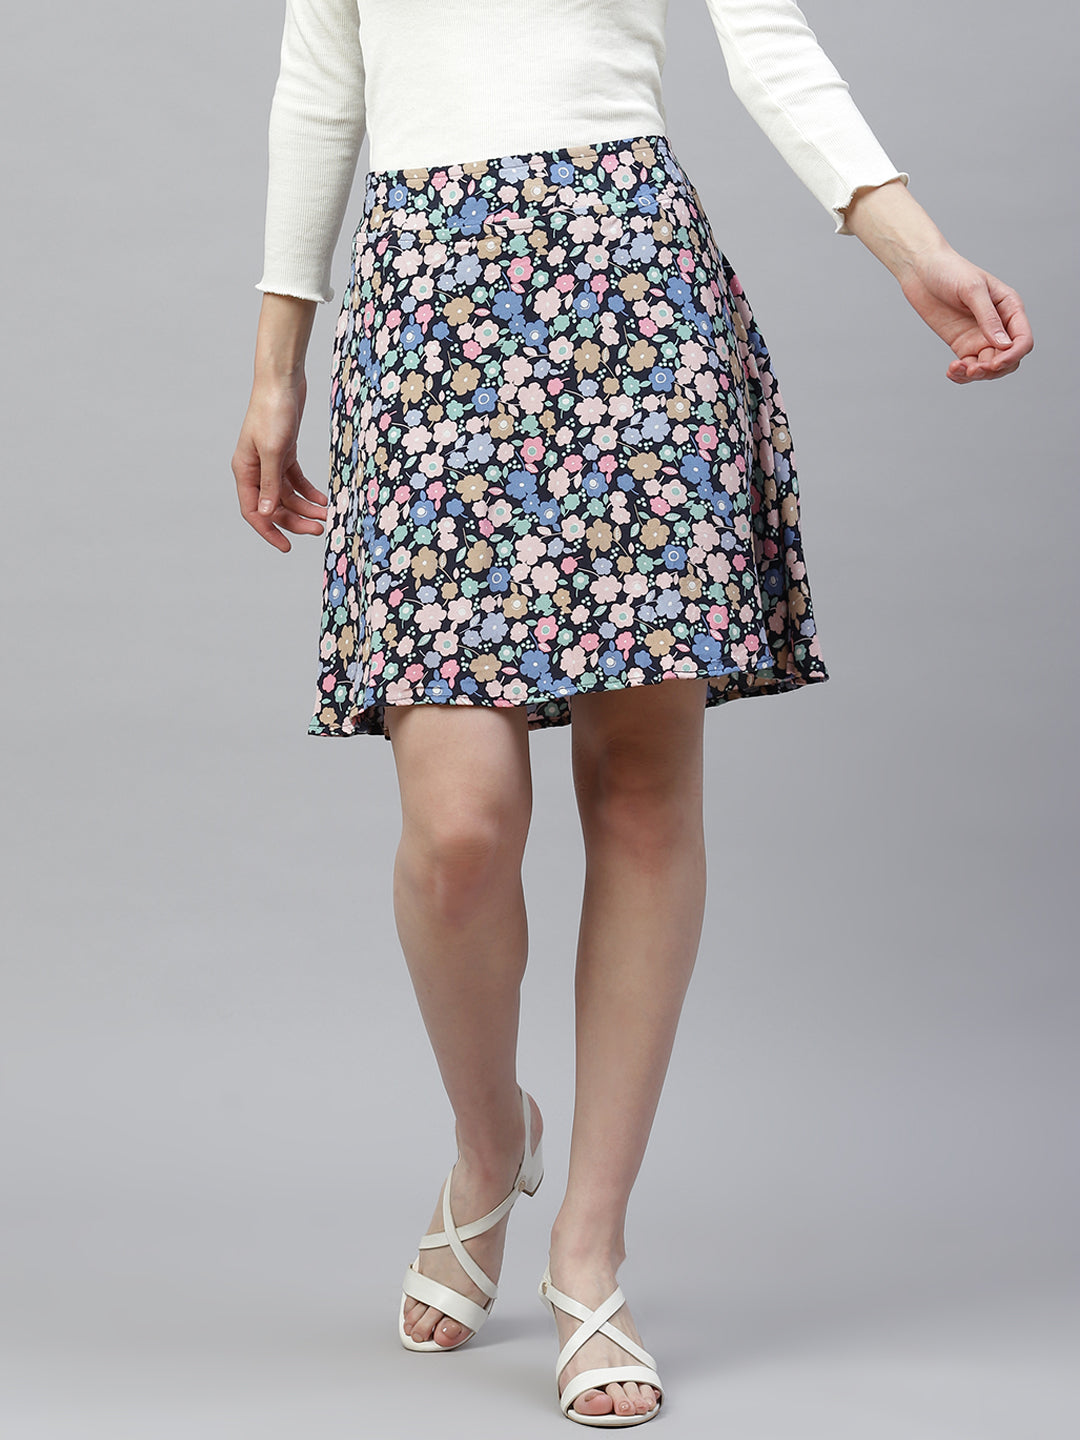 Ayaany Women Blue Printed Floral Cotton Lined Short Skirt